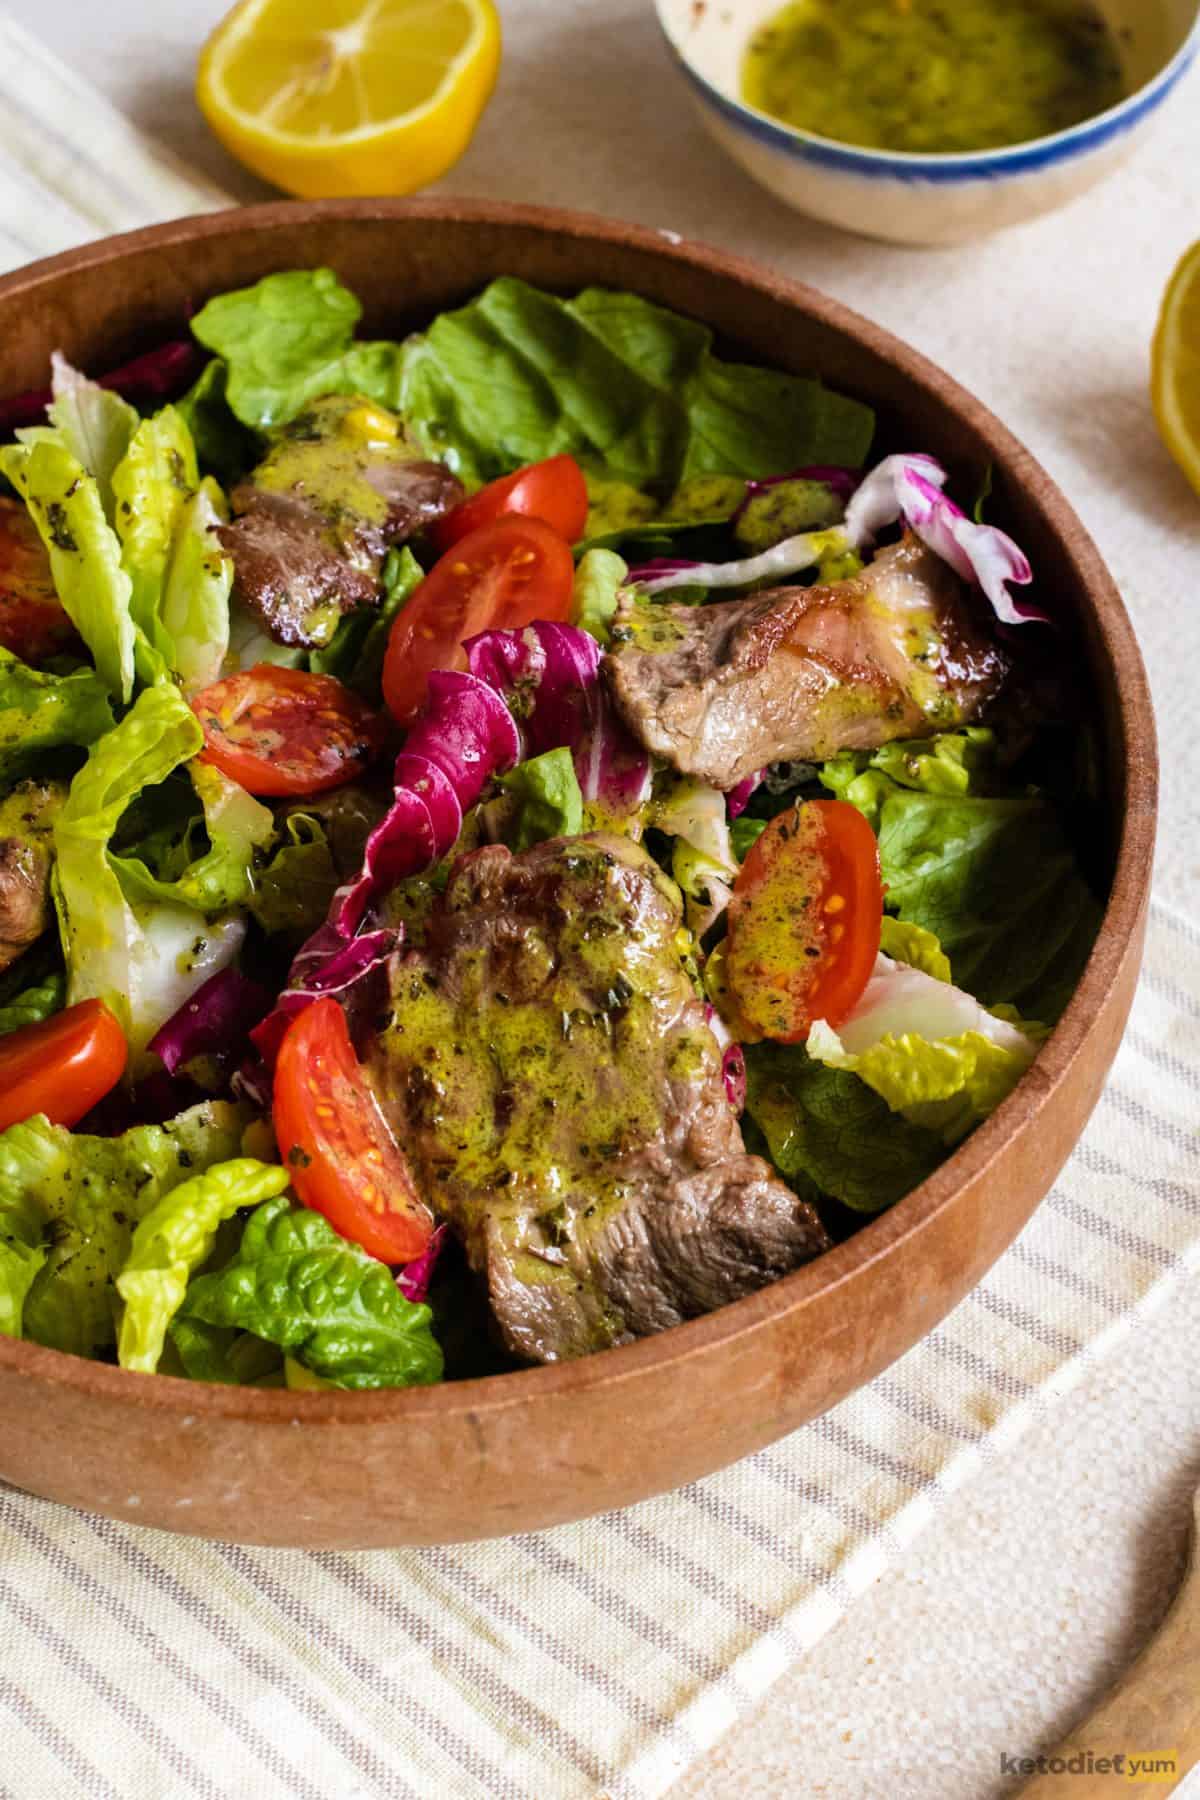 Keto steak salad finished and served in a brown bowl